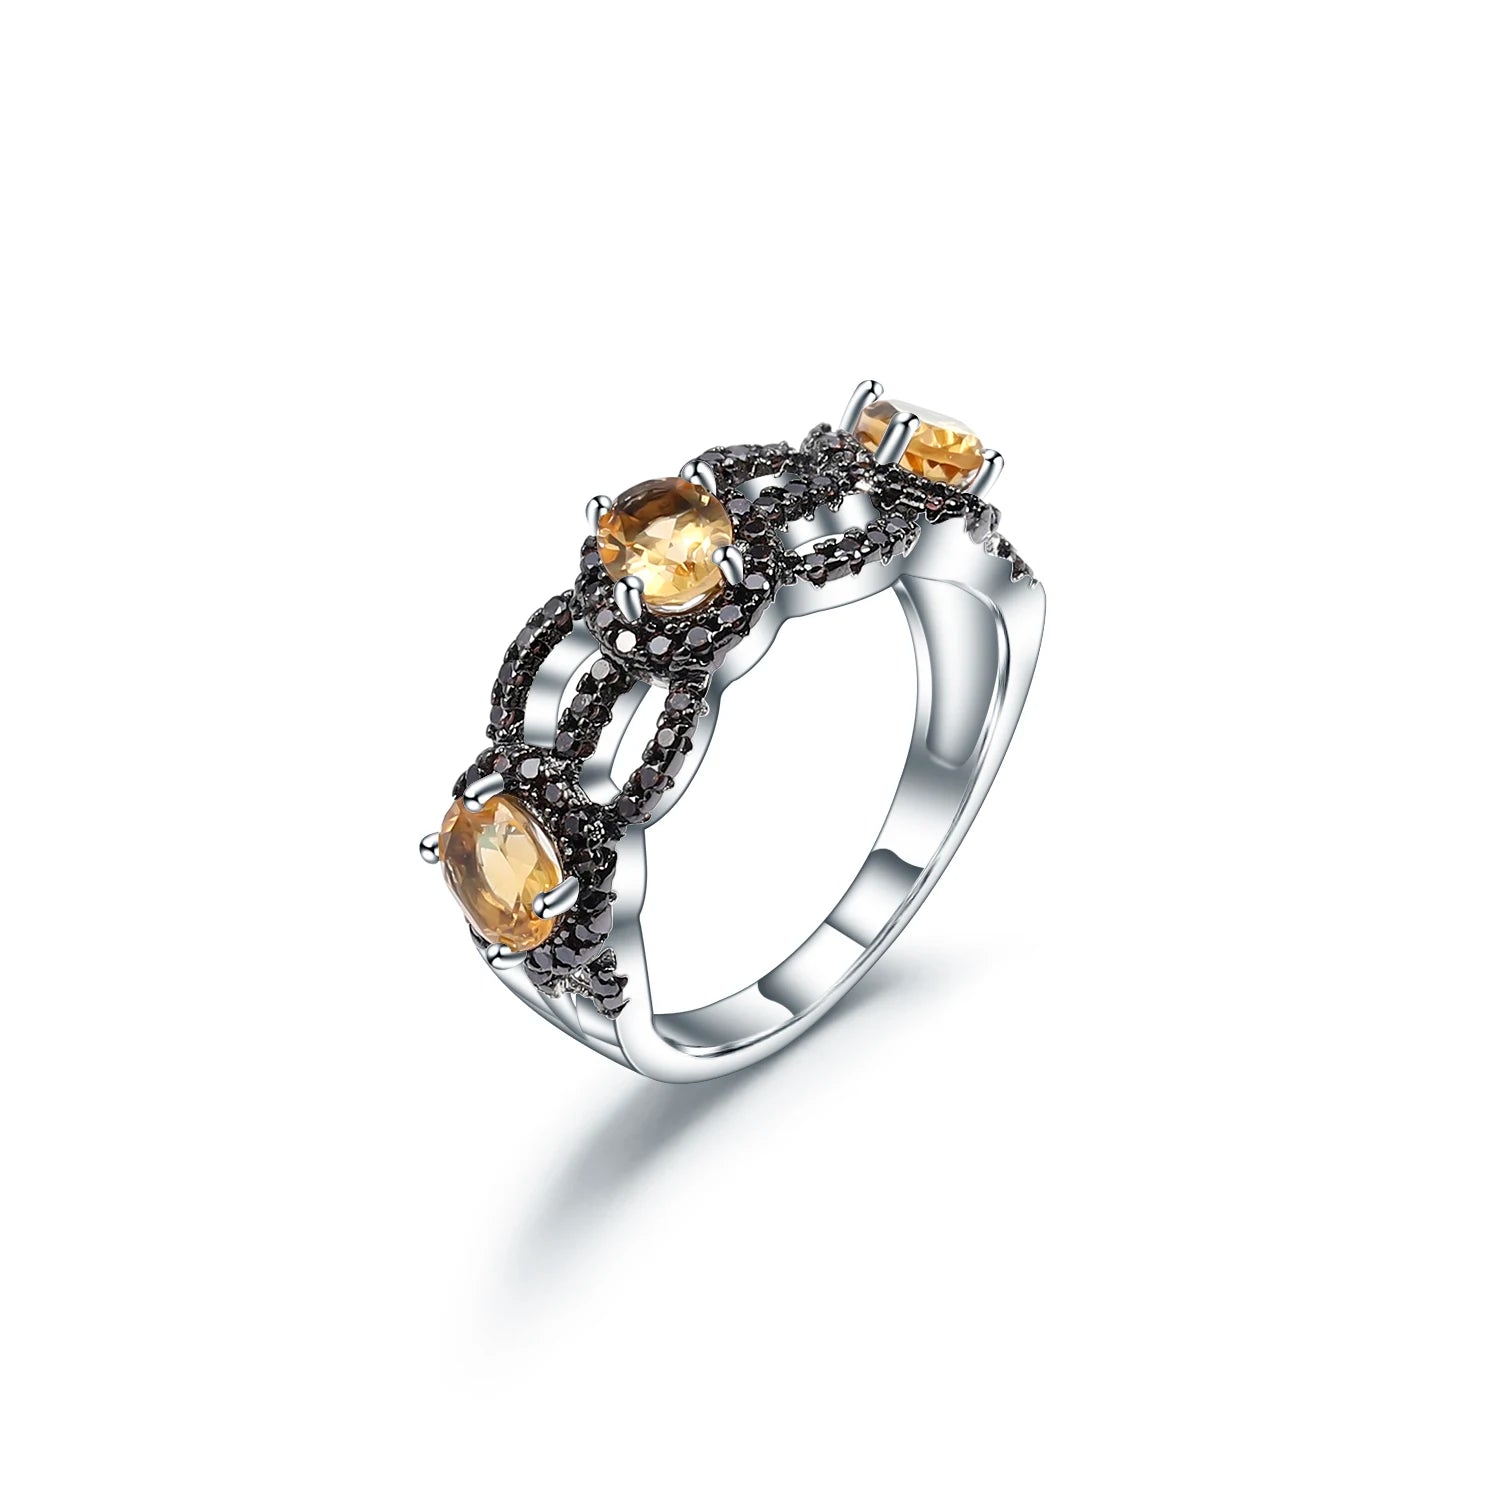 1.35Ct Garnet Antique Style Three Stone Ring 925 Sterling Silver925 Sterling SilverCitrine